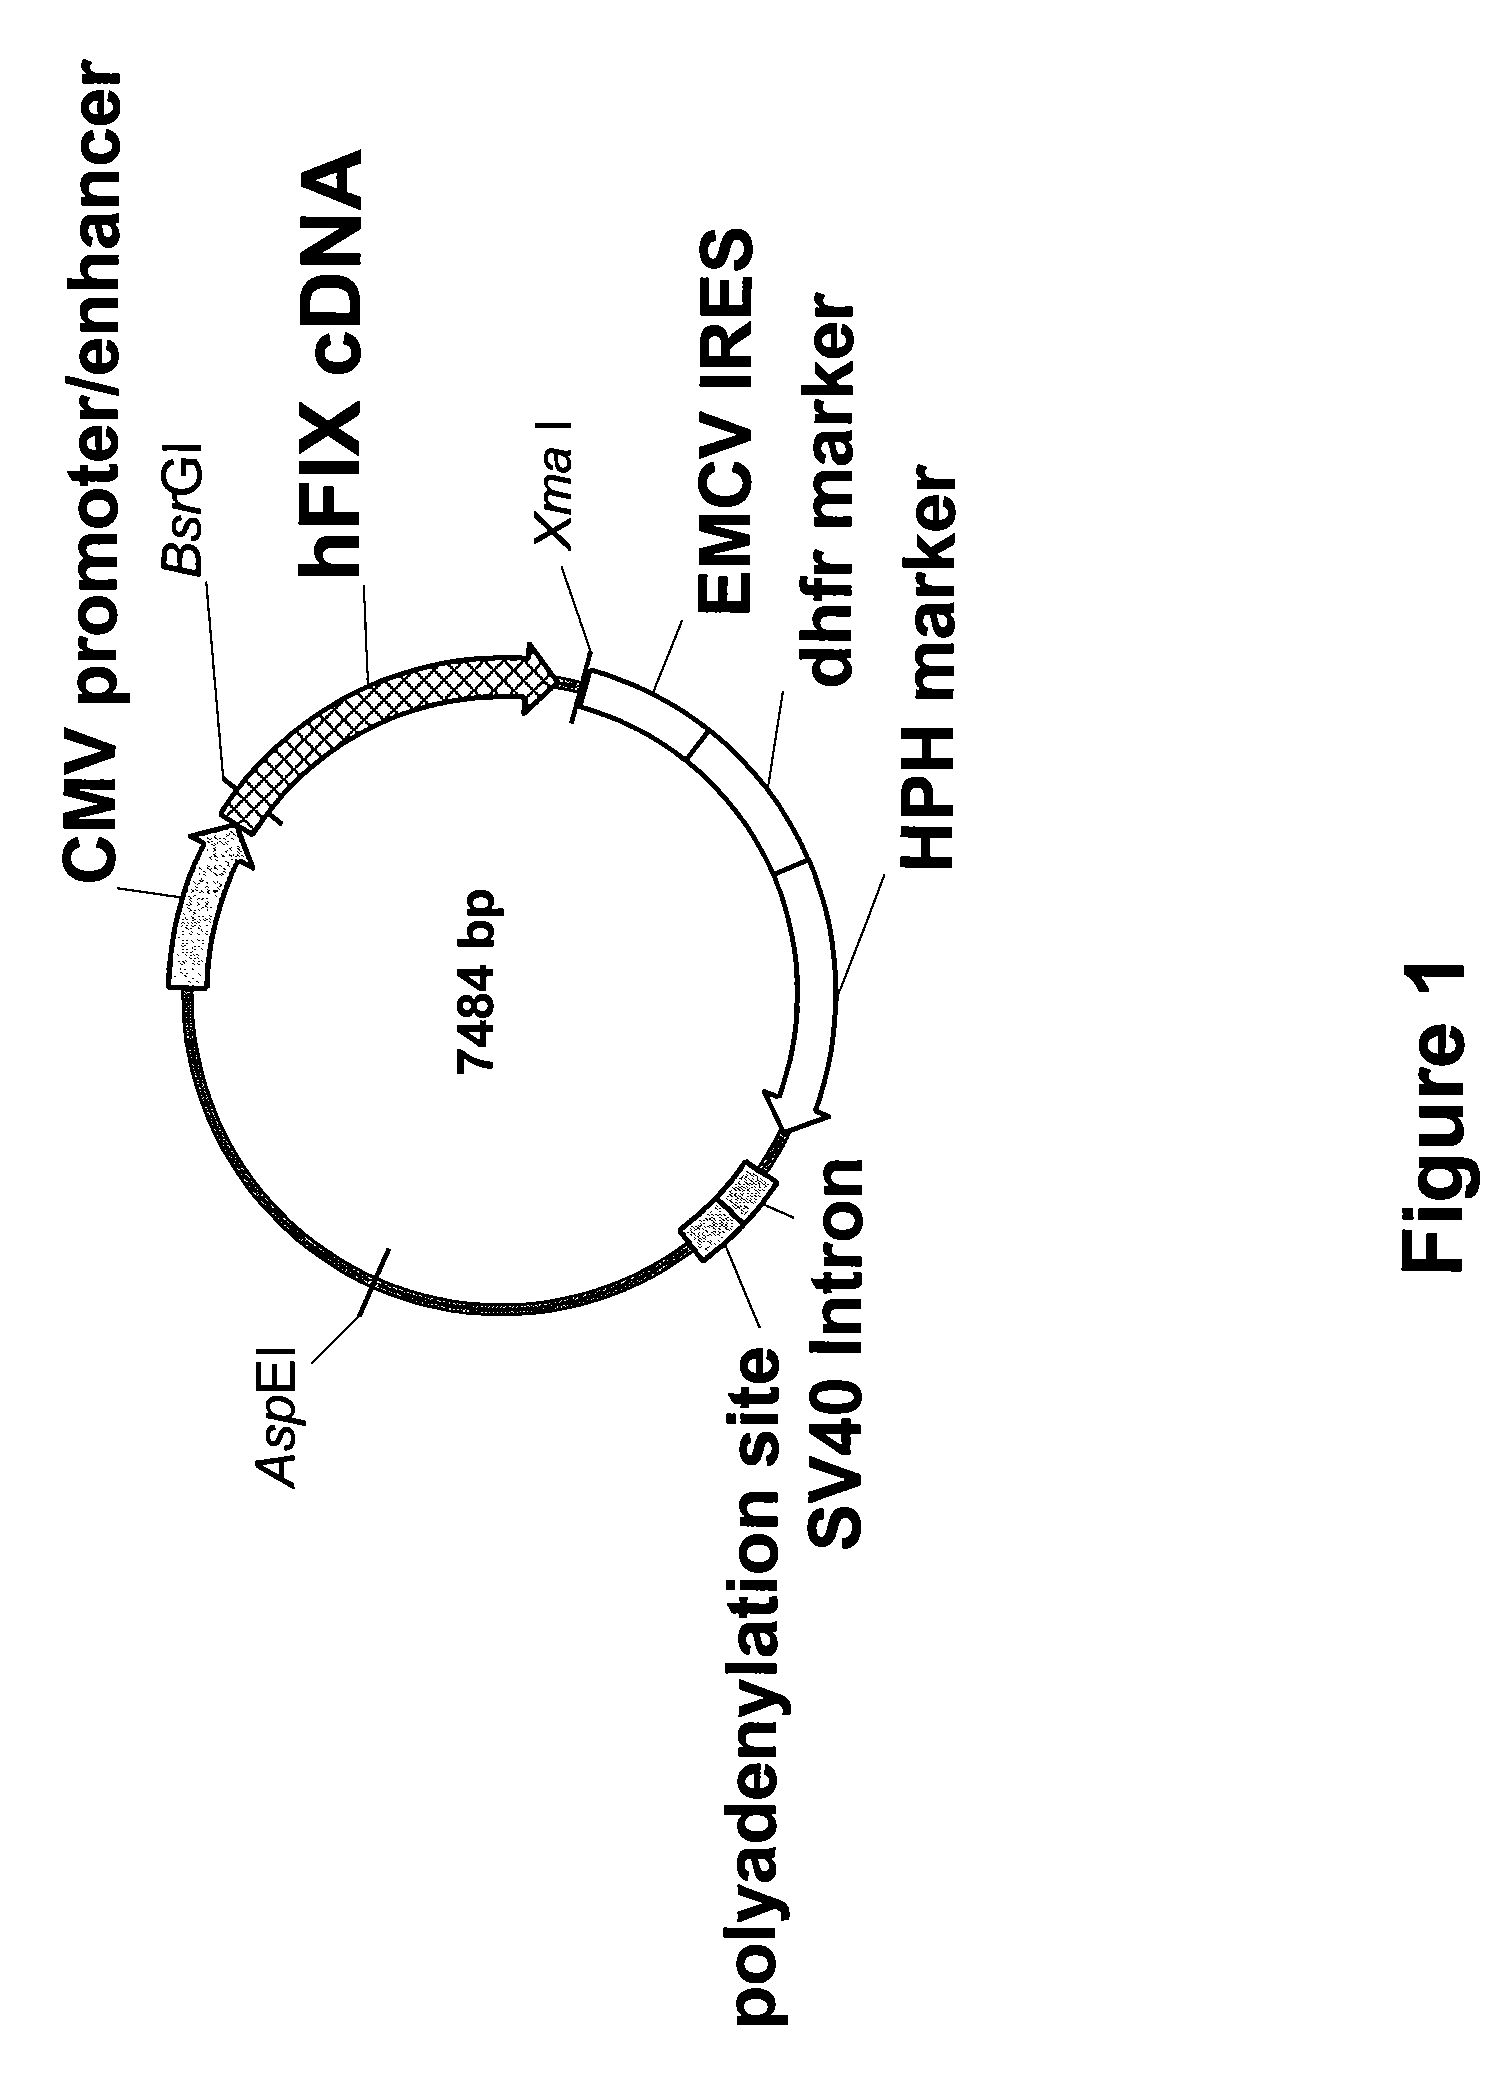 FVIII-Independent FIX-Mutant Proteins for Hemophilia A Treatment